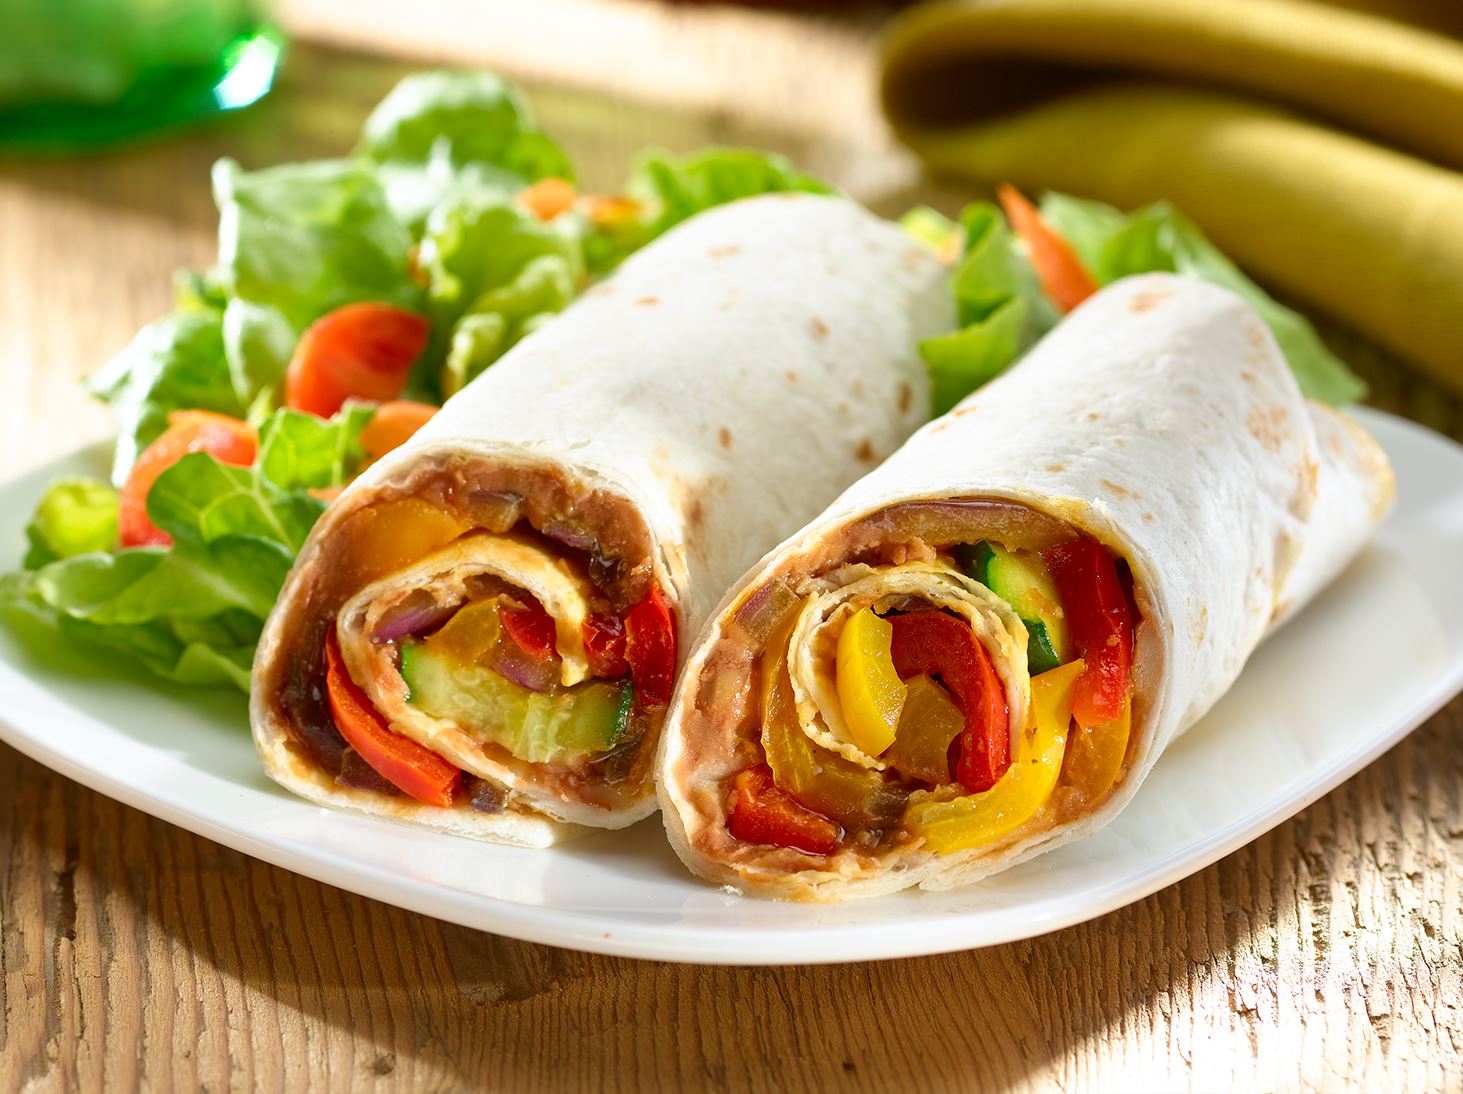 Grilled Vegetable Wrap with Peppers, Zucchini and Beans - Meatless Monday